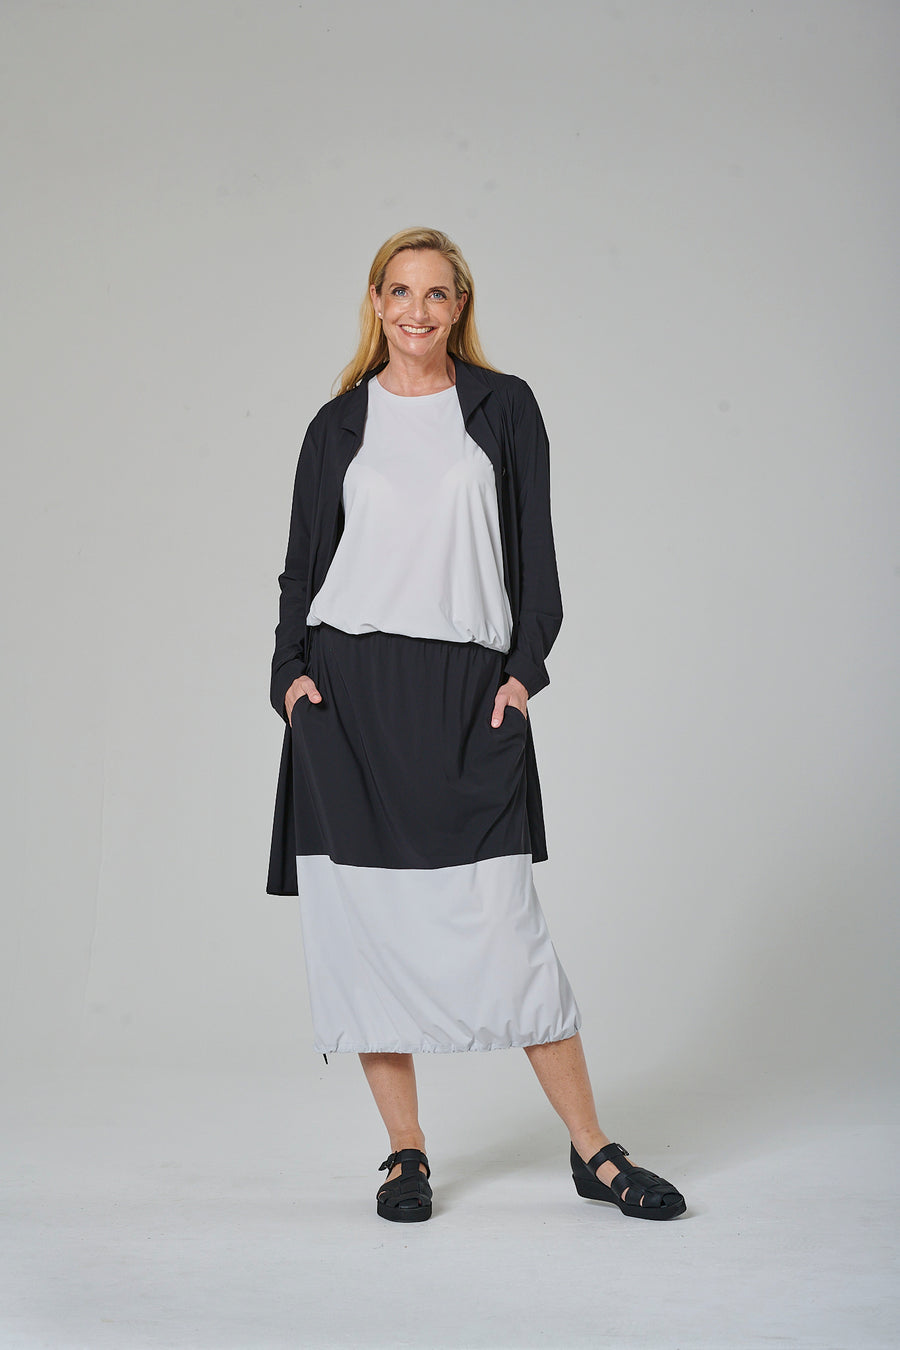 Skirt made of techno jersey (321r1) in two colors or plain